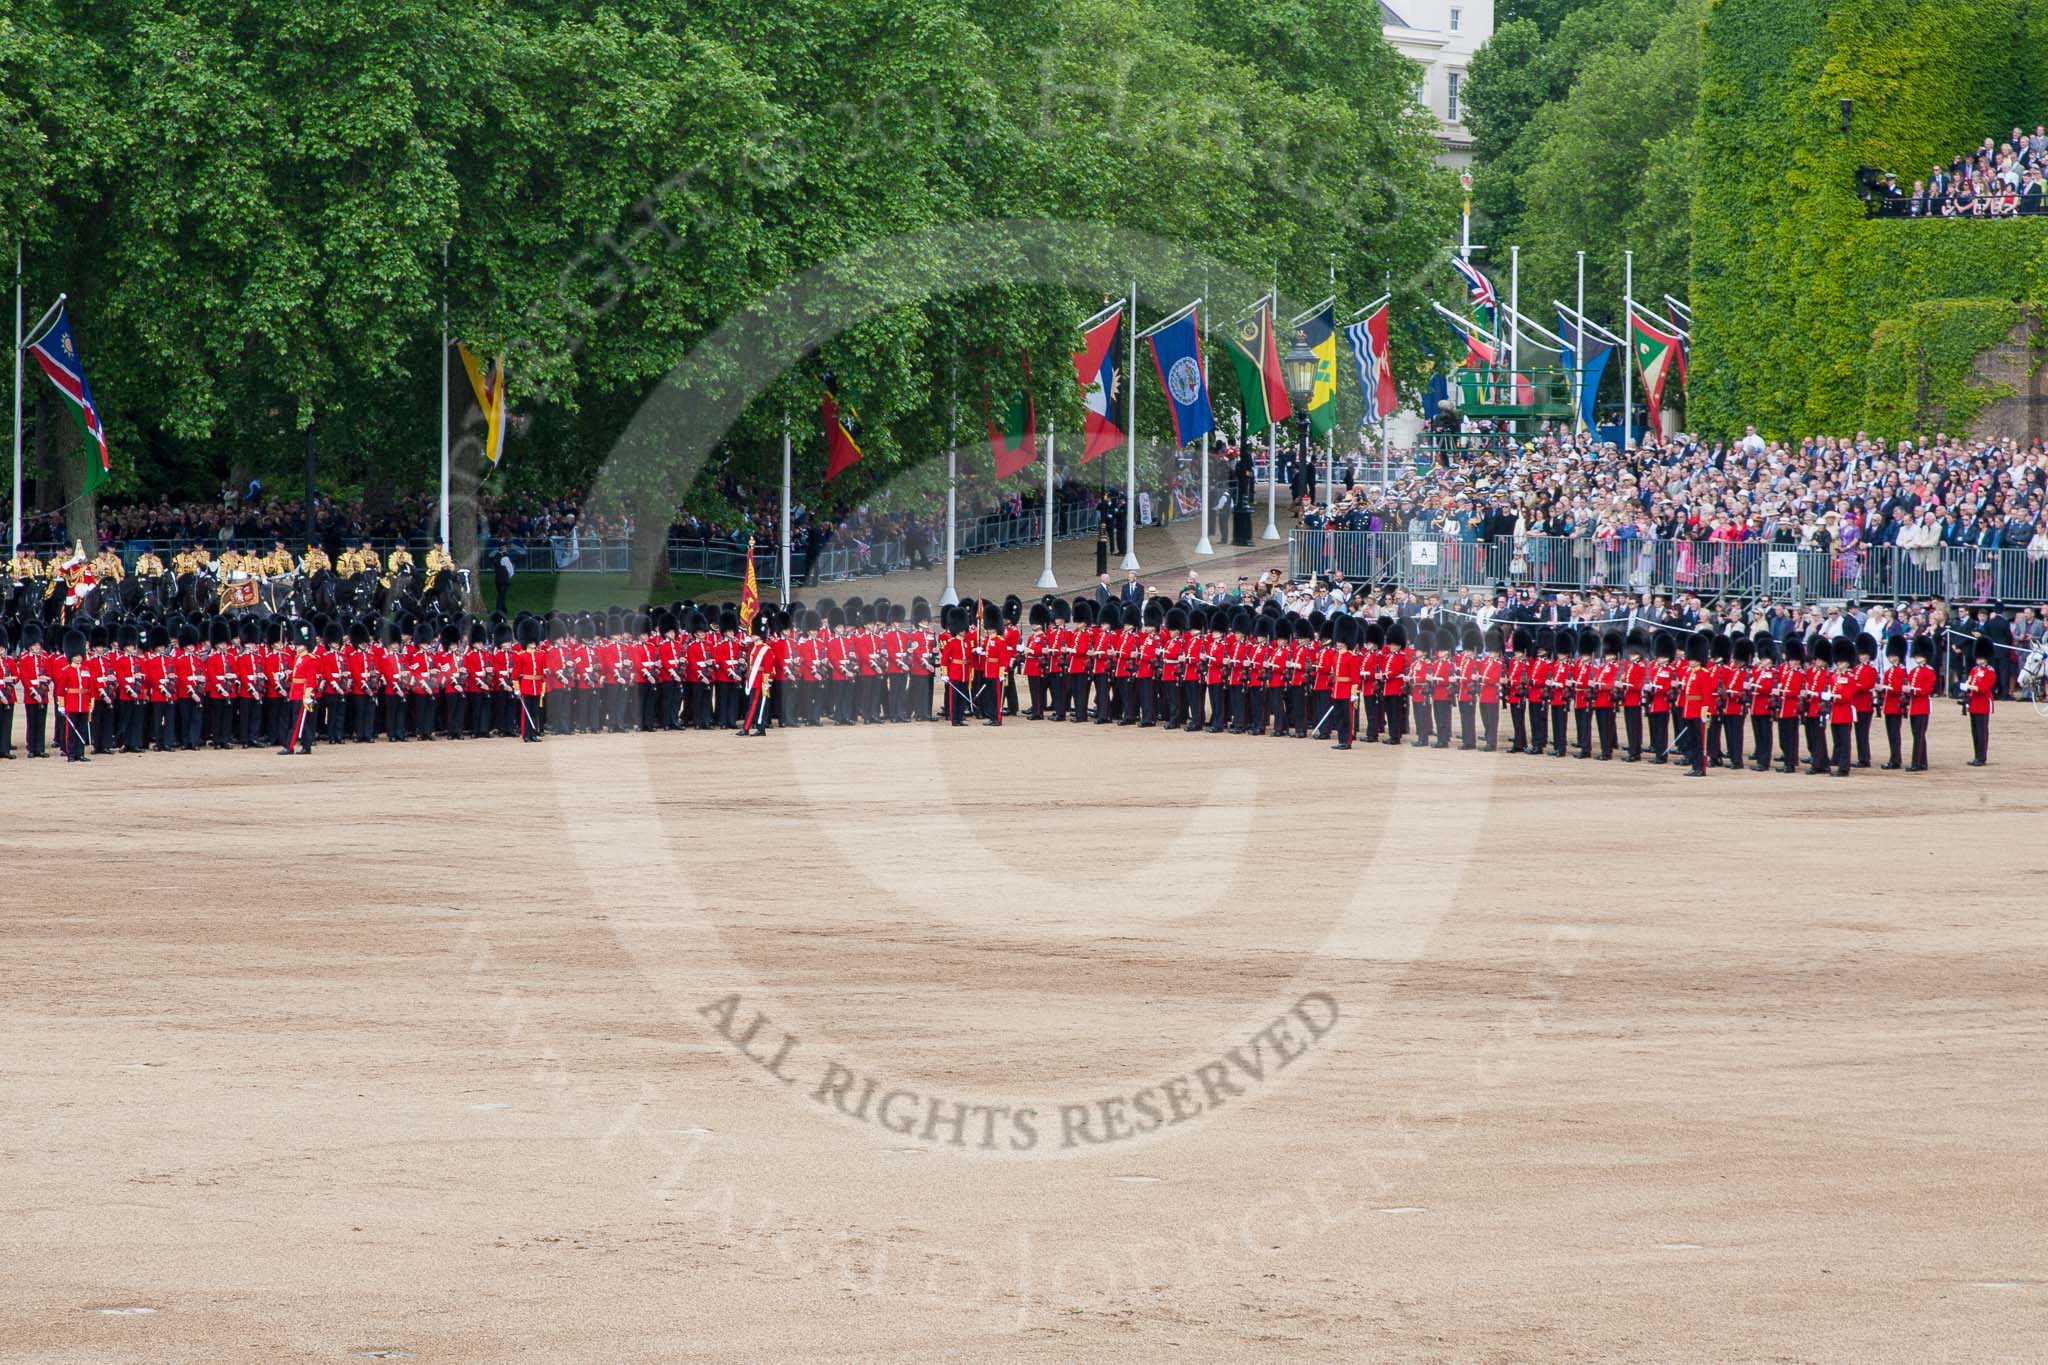 Trooping the Colour 2013: The Escort to the Colour troops the Colour past No. 5 Guard, F Company Scots Guards. Image #495, 15 June 2013 11:25 Horse Guards Parade, London, UK